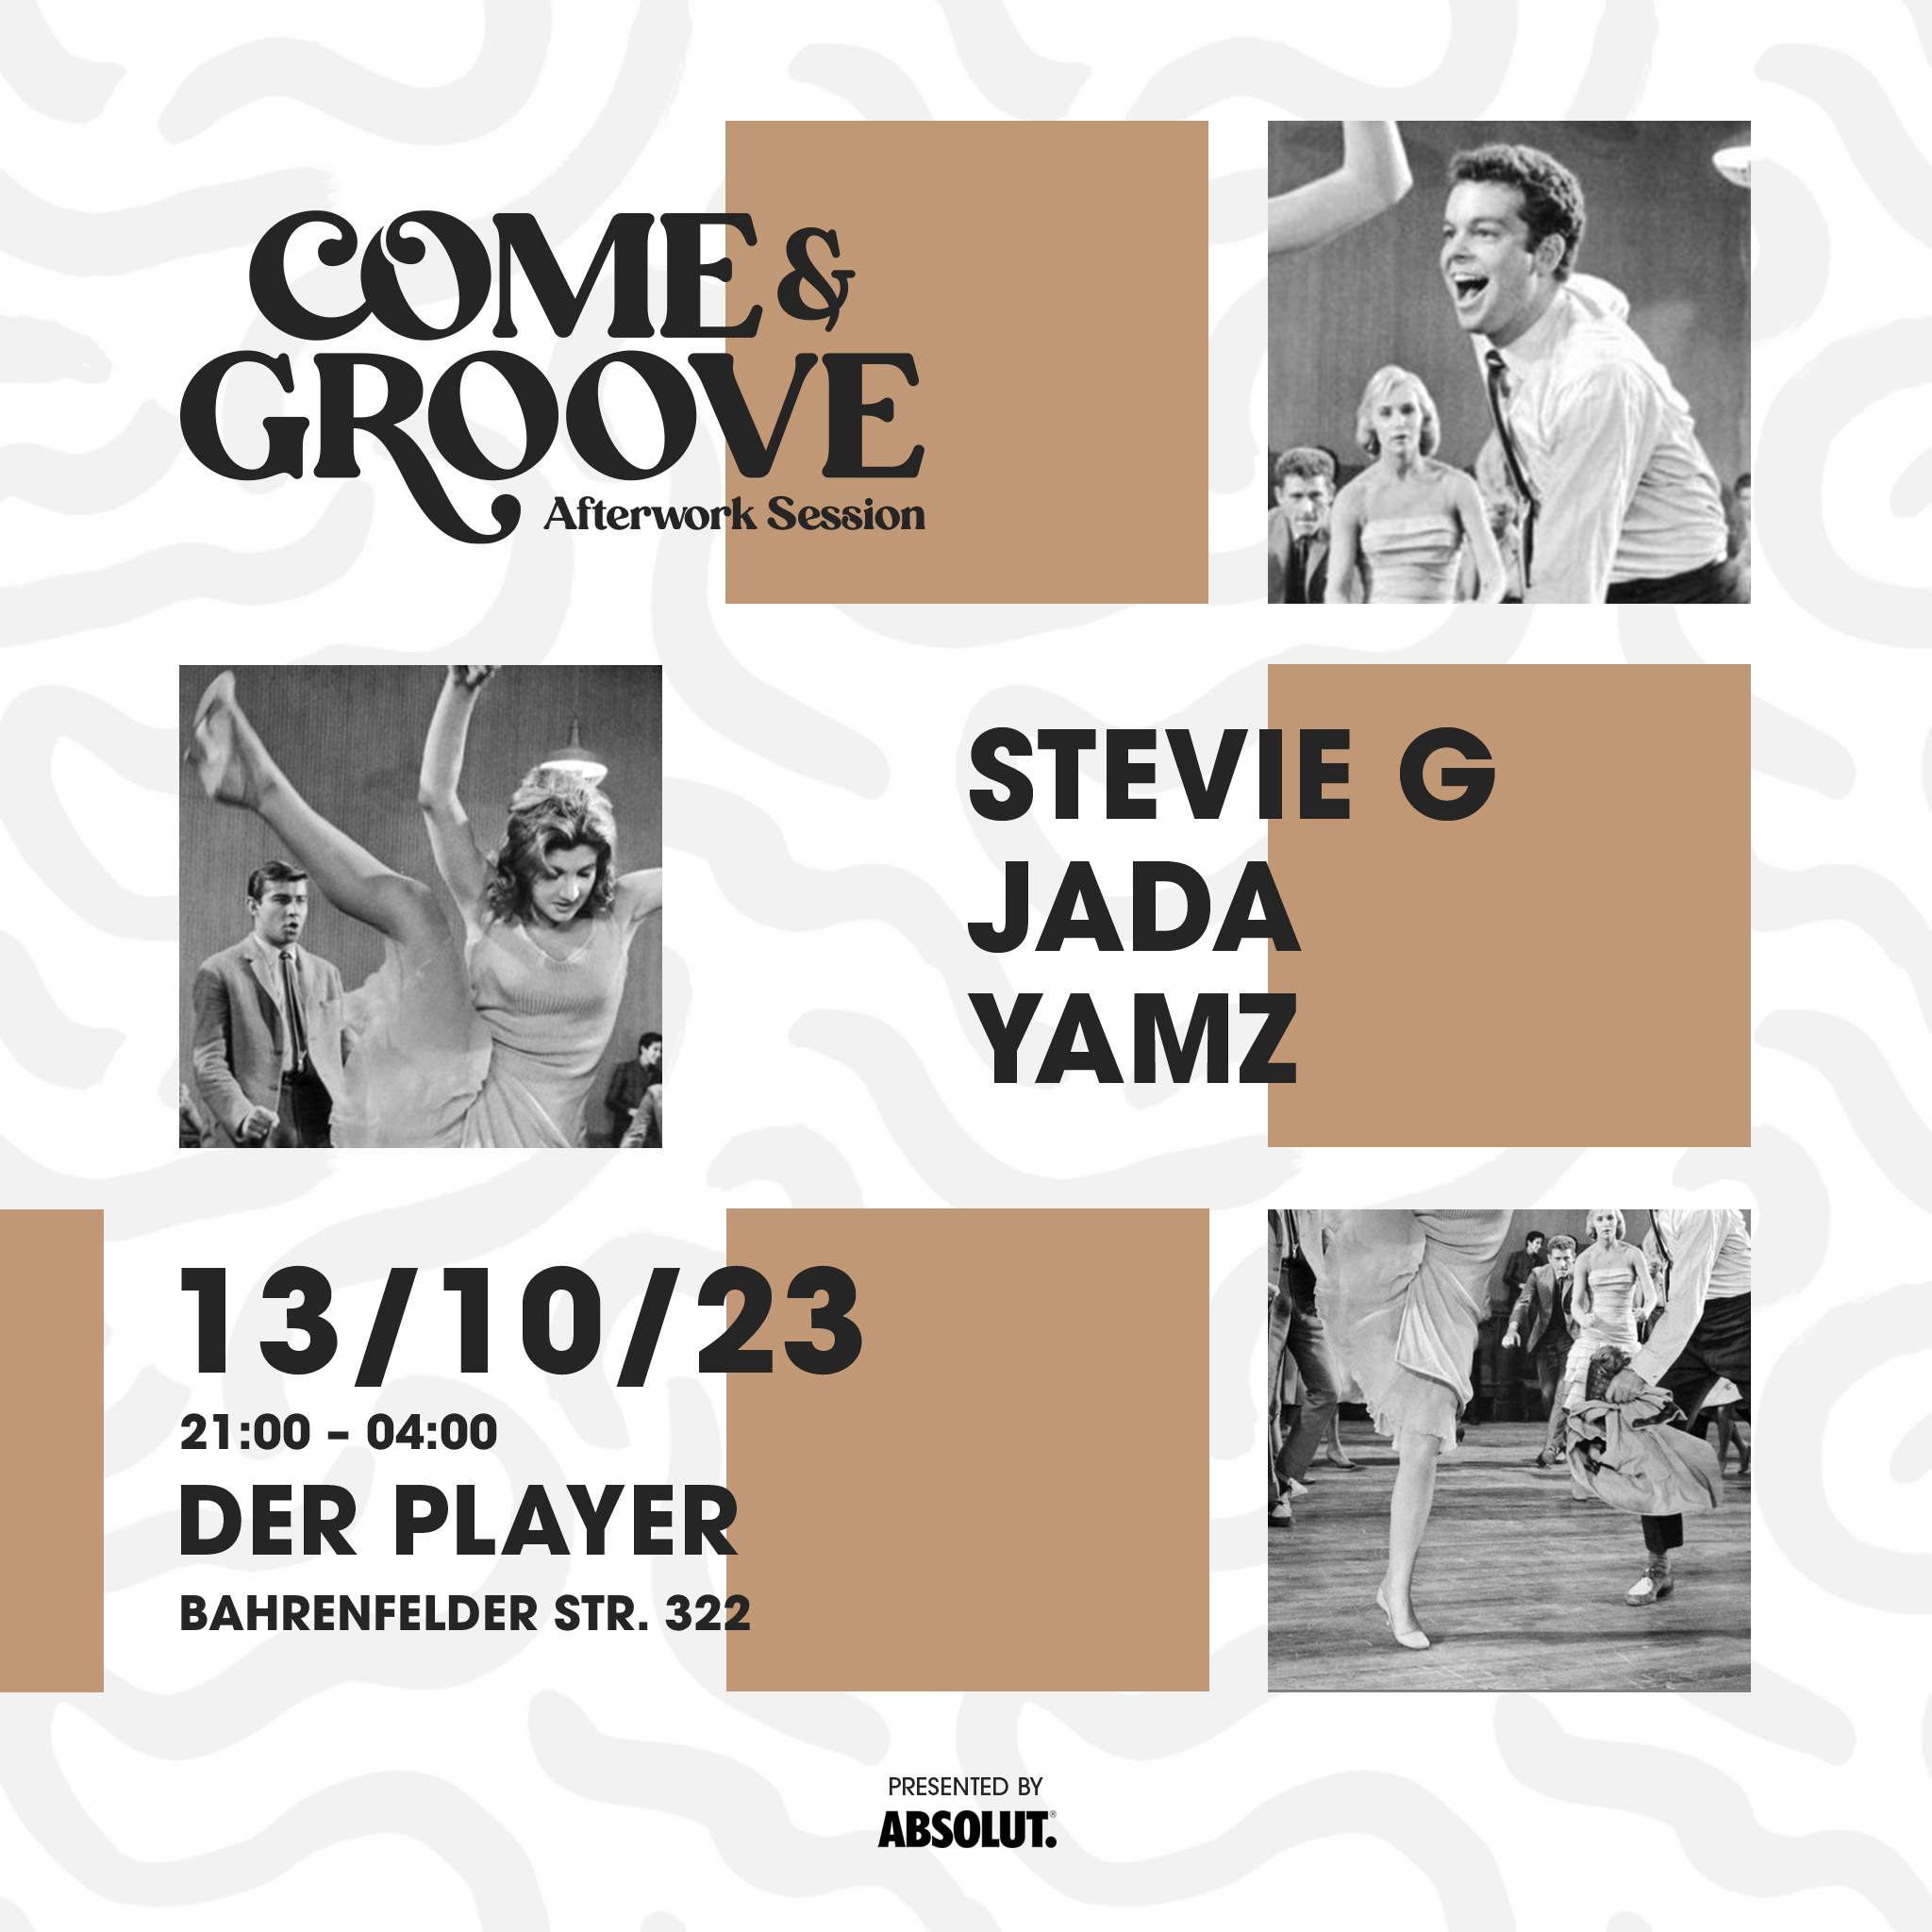 Come & Groove 'Afterwork Session' - Página frontal